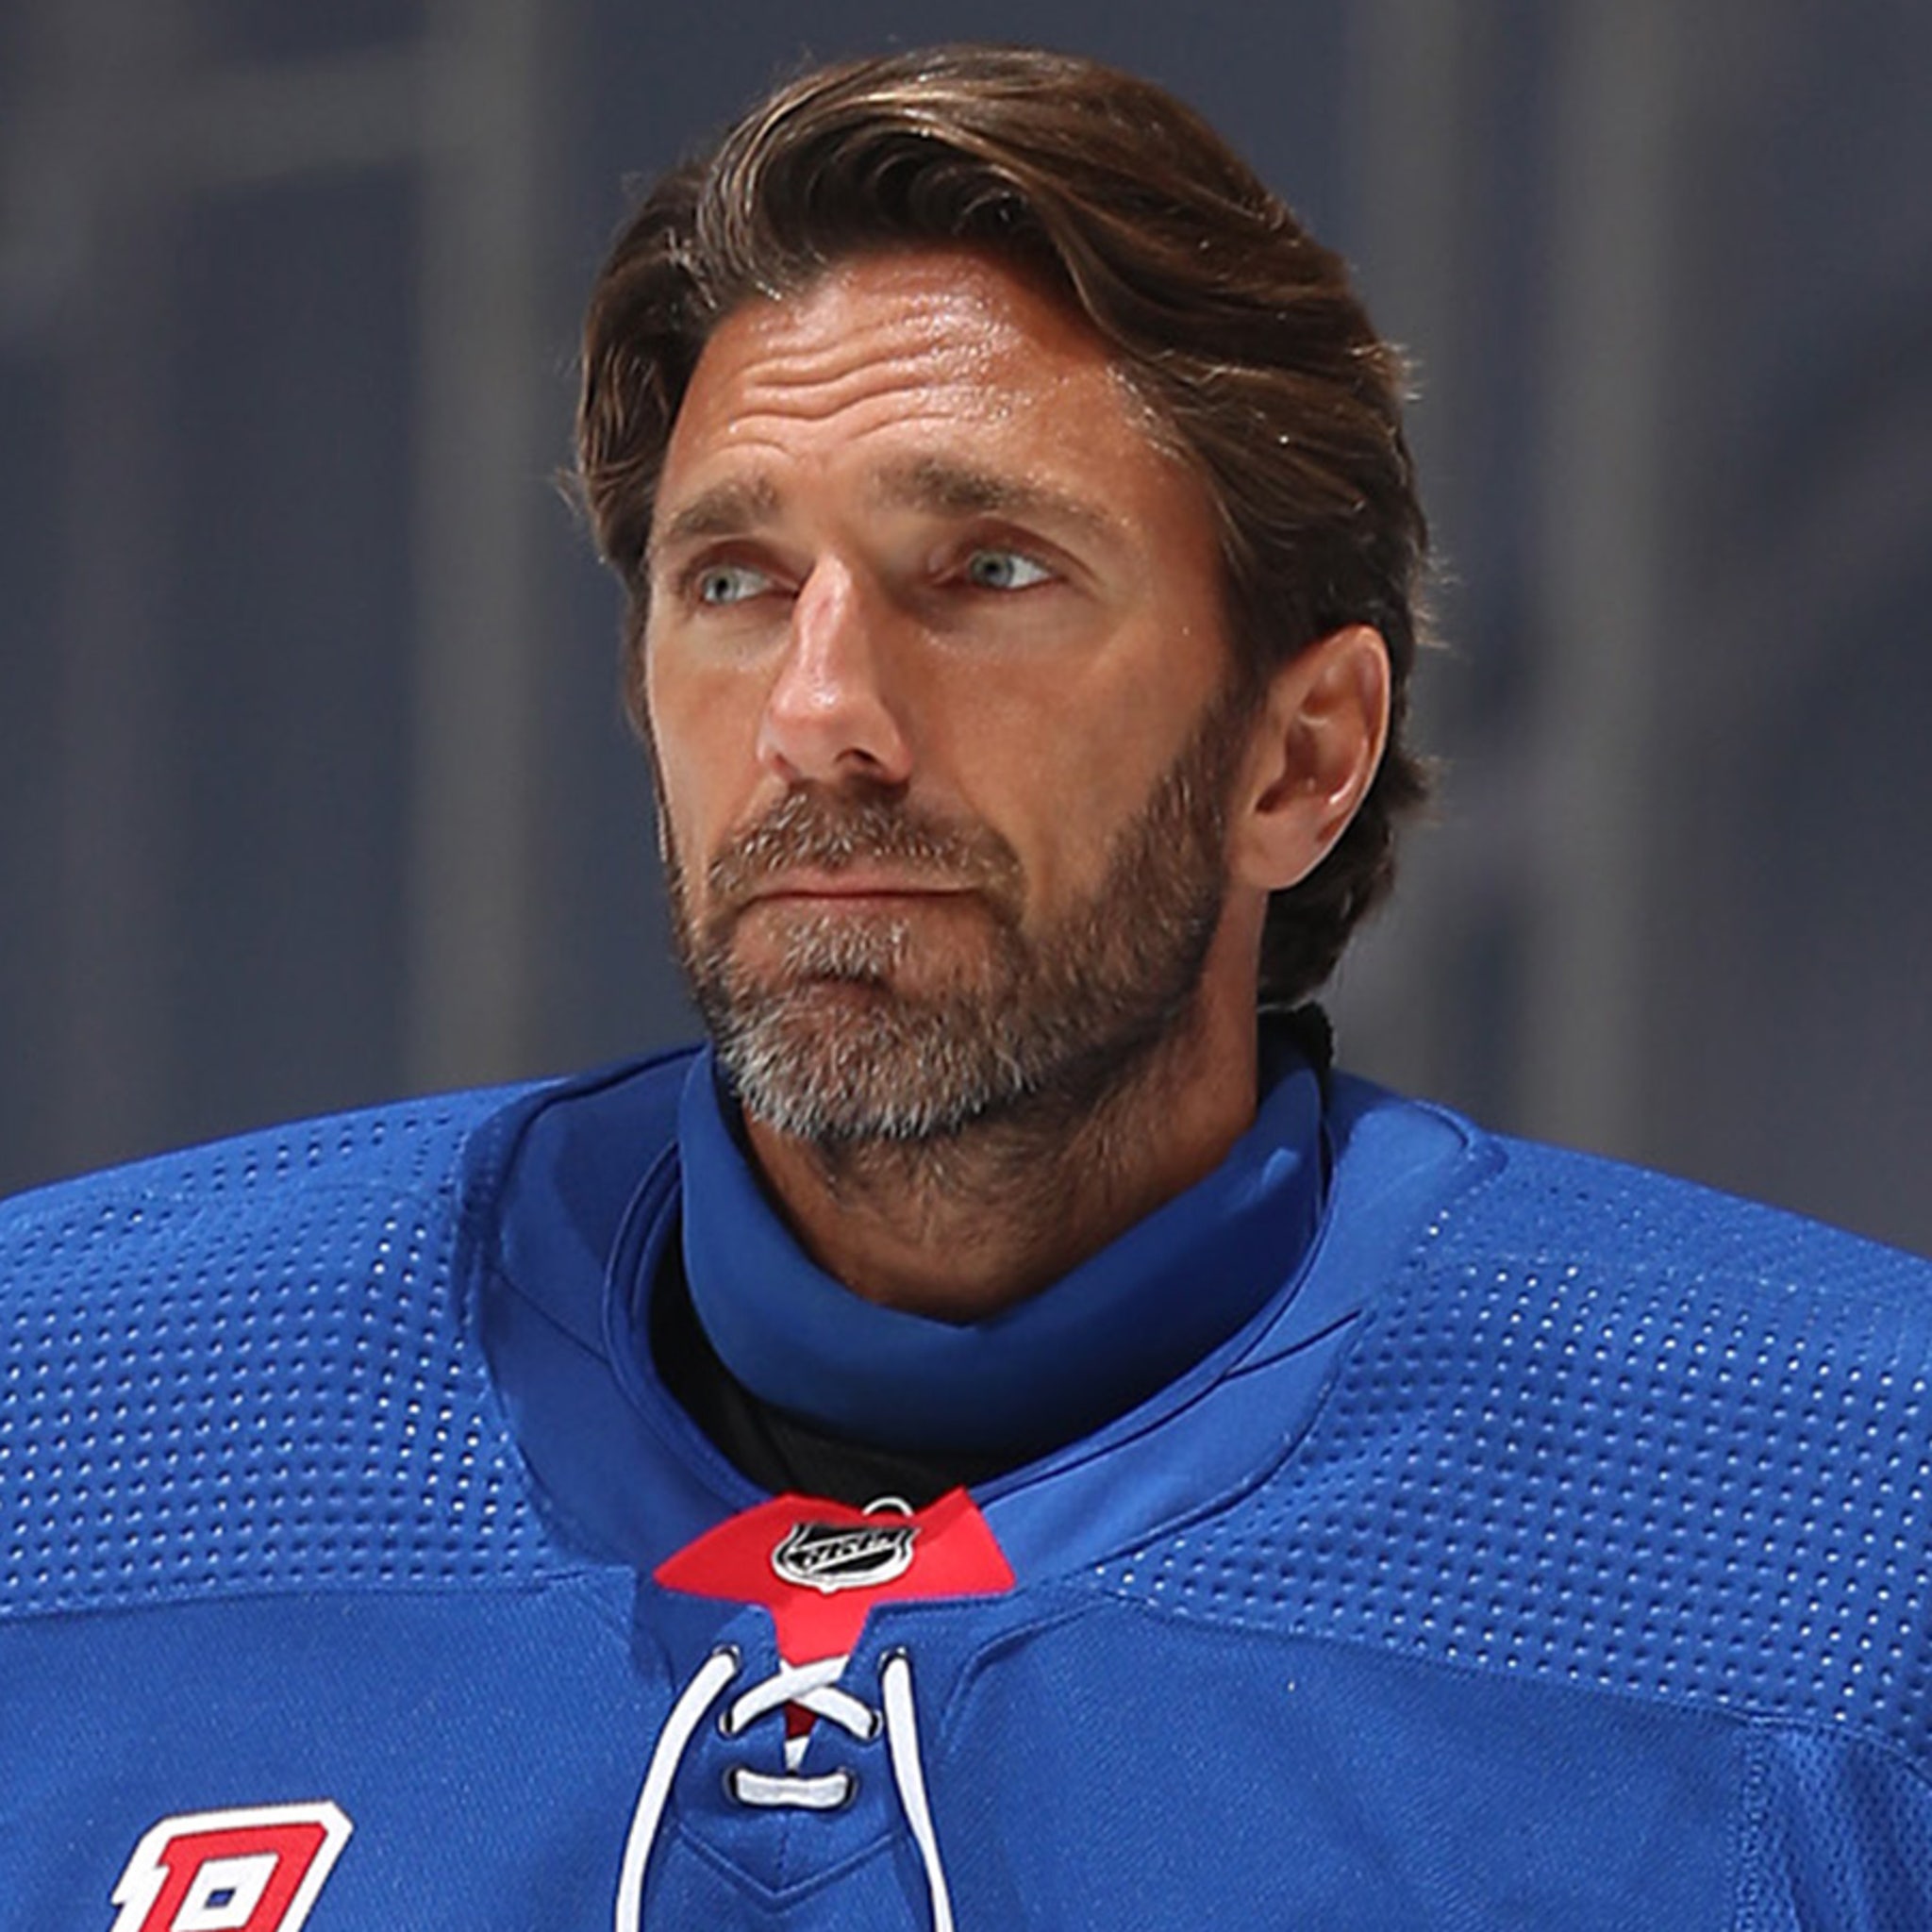 Shocking': King Henrik to miss season with heart condition